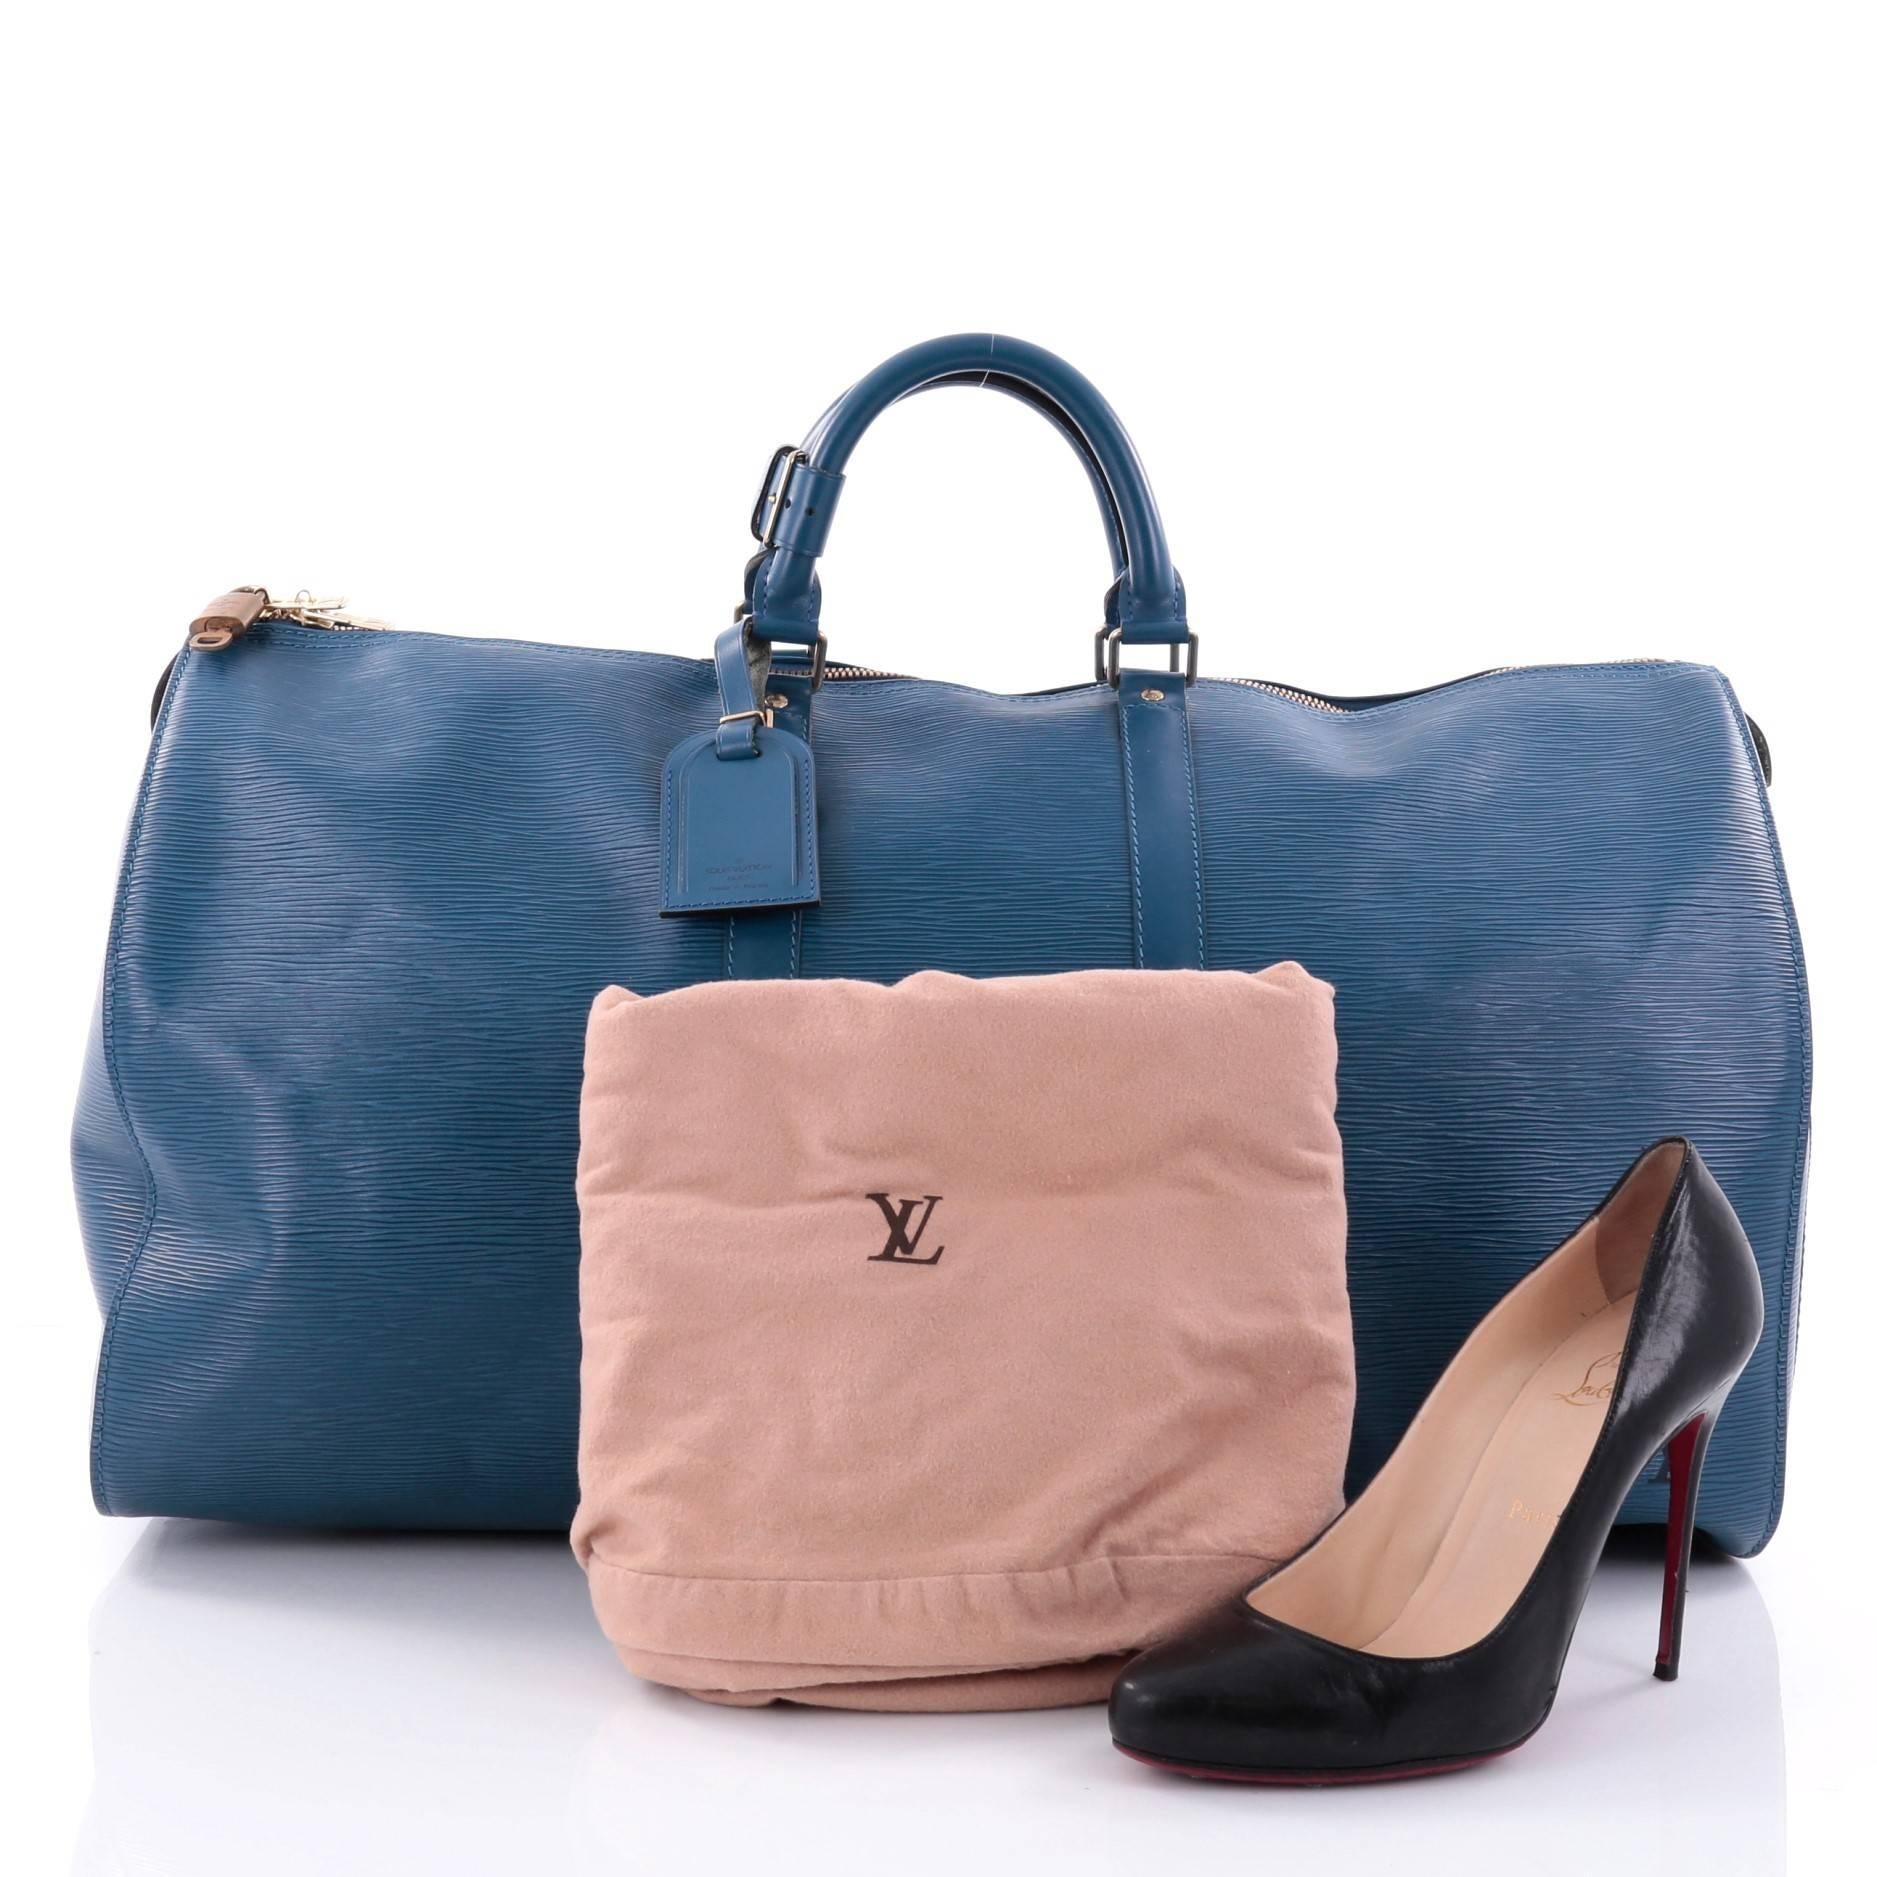 This authentic Louis Vuitton Keepall Bag Epi Leather 55 features the brand's timeless travel bags. Constructed from sleek blue epi leather, this iconic Keepall as classic as the Speedy features dual-rolled handles, subtle LV logo and gold-tone